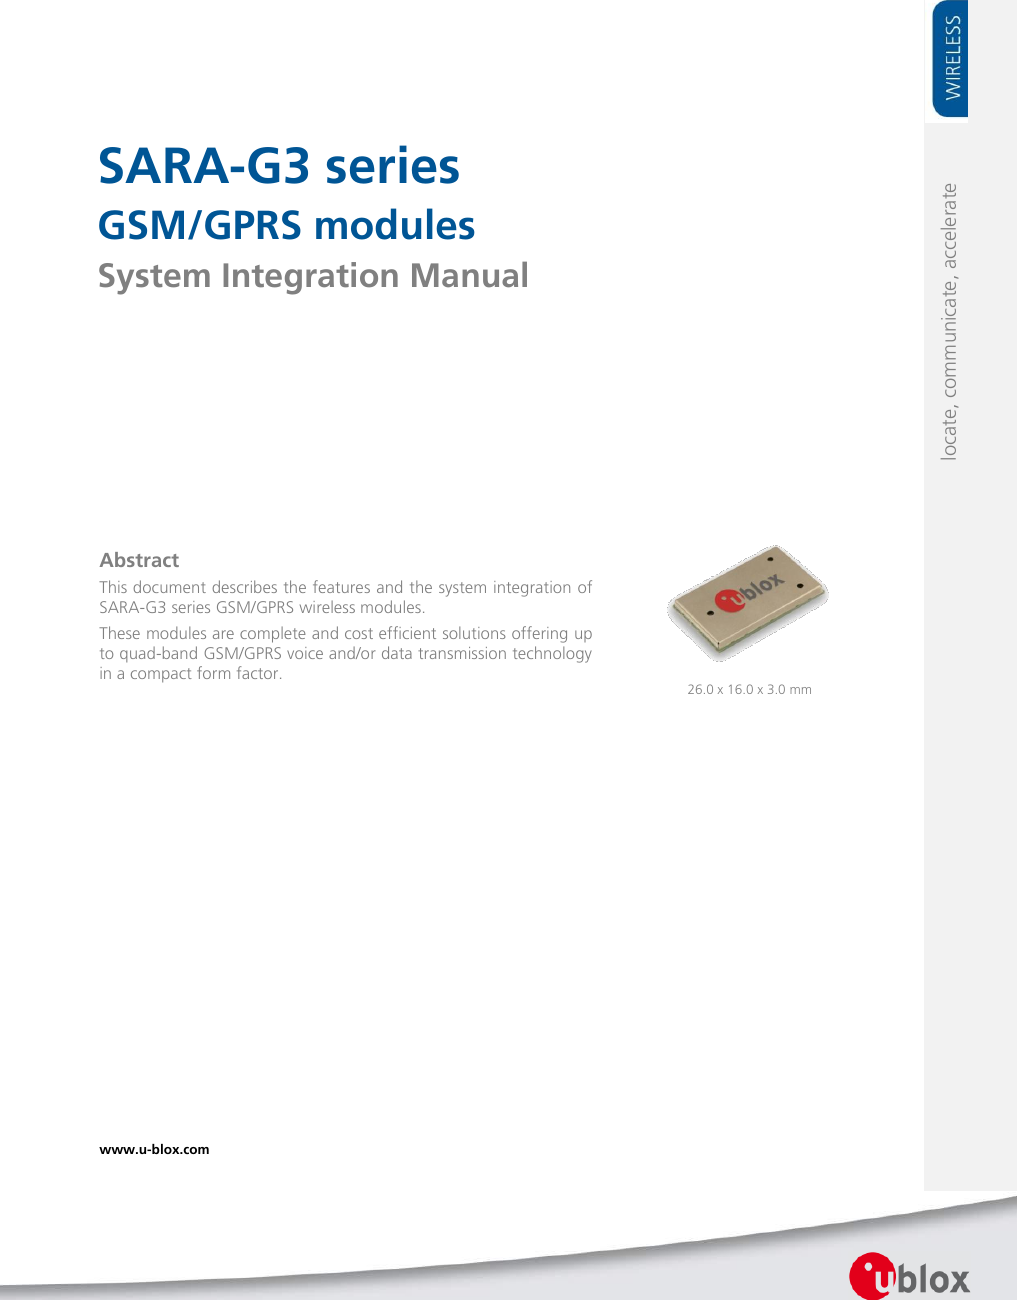     SARA-G3 series GSM/GPRS modules System Integration Manual                   Abstract This document describes the features and the system integration of SARA-G3 series GSM/GPRS wireless modules. These modules are complete and cost efficient solutions offering up to quad-band GSM/GPRS voice and/or data transmission technology in a compact form factor.  www.u-blox.com   26.0 x 16.0 x 3.0 mm locate, communicate, accelerate 